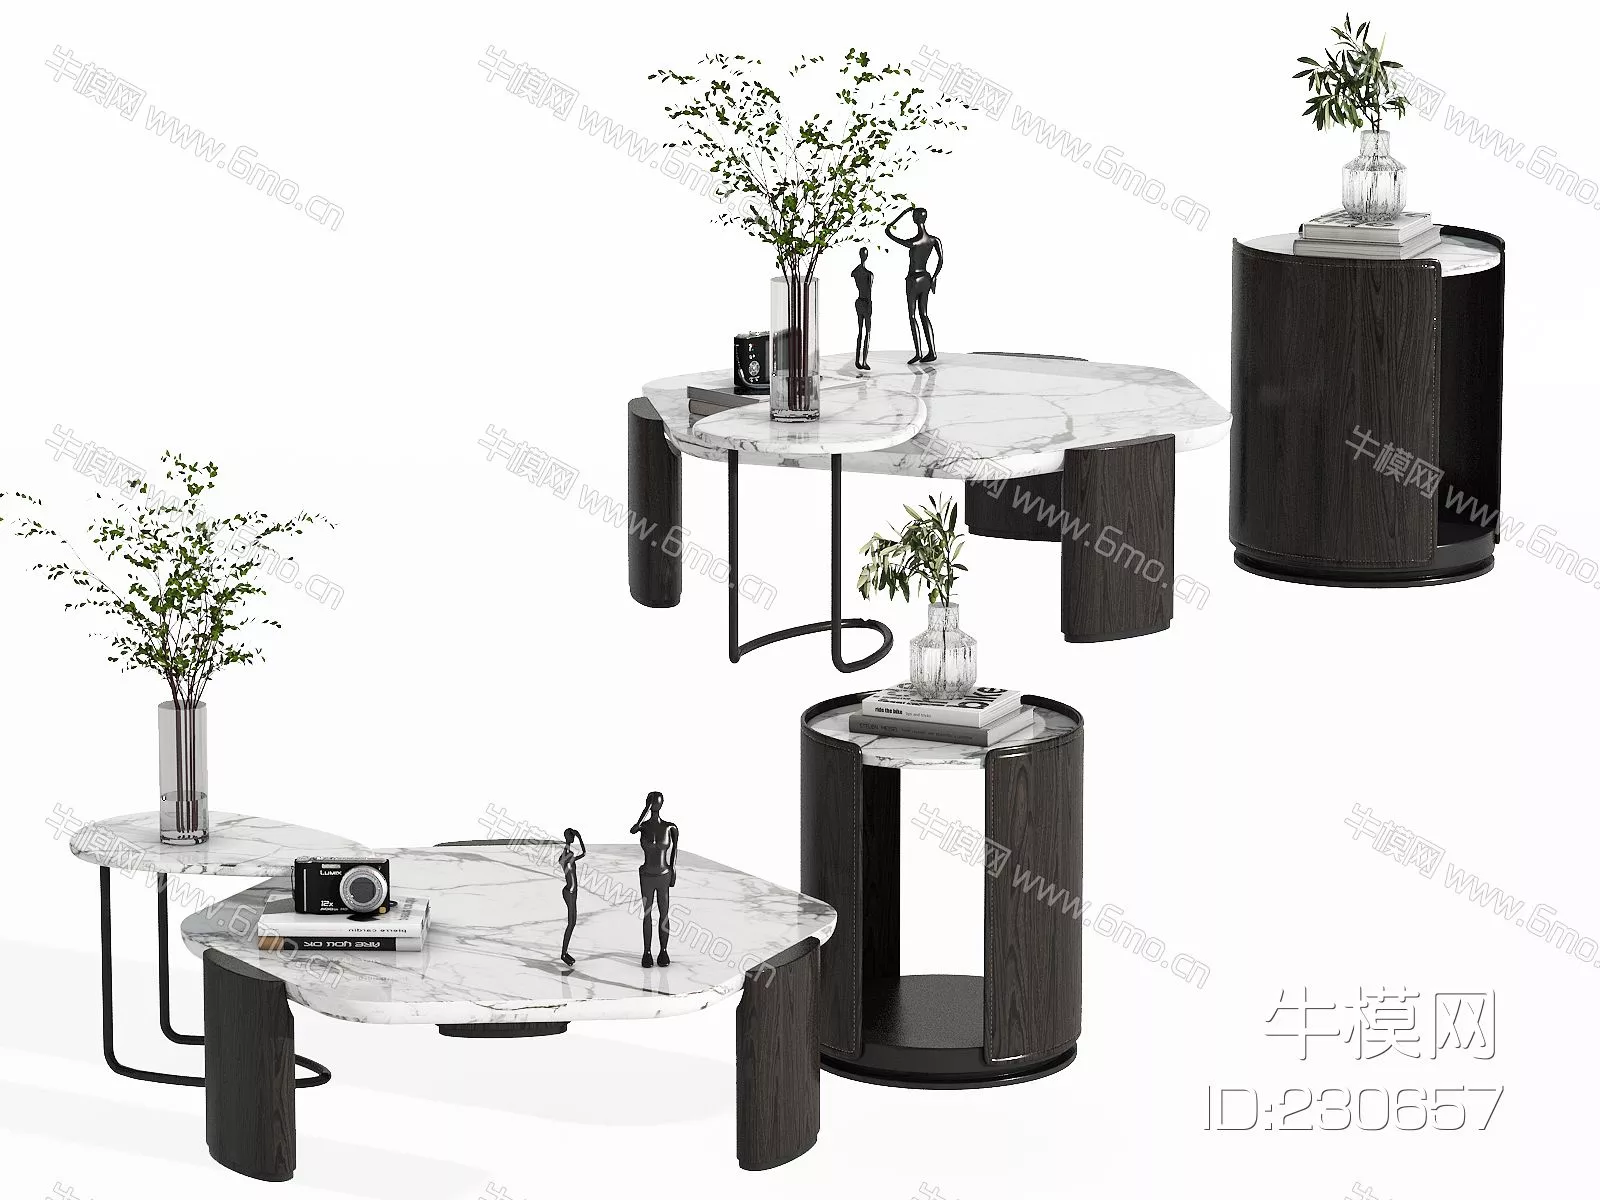 MODERN COFFEE TABLE - SKETCHUP 3D MODEL - VRAY - 230657